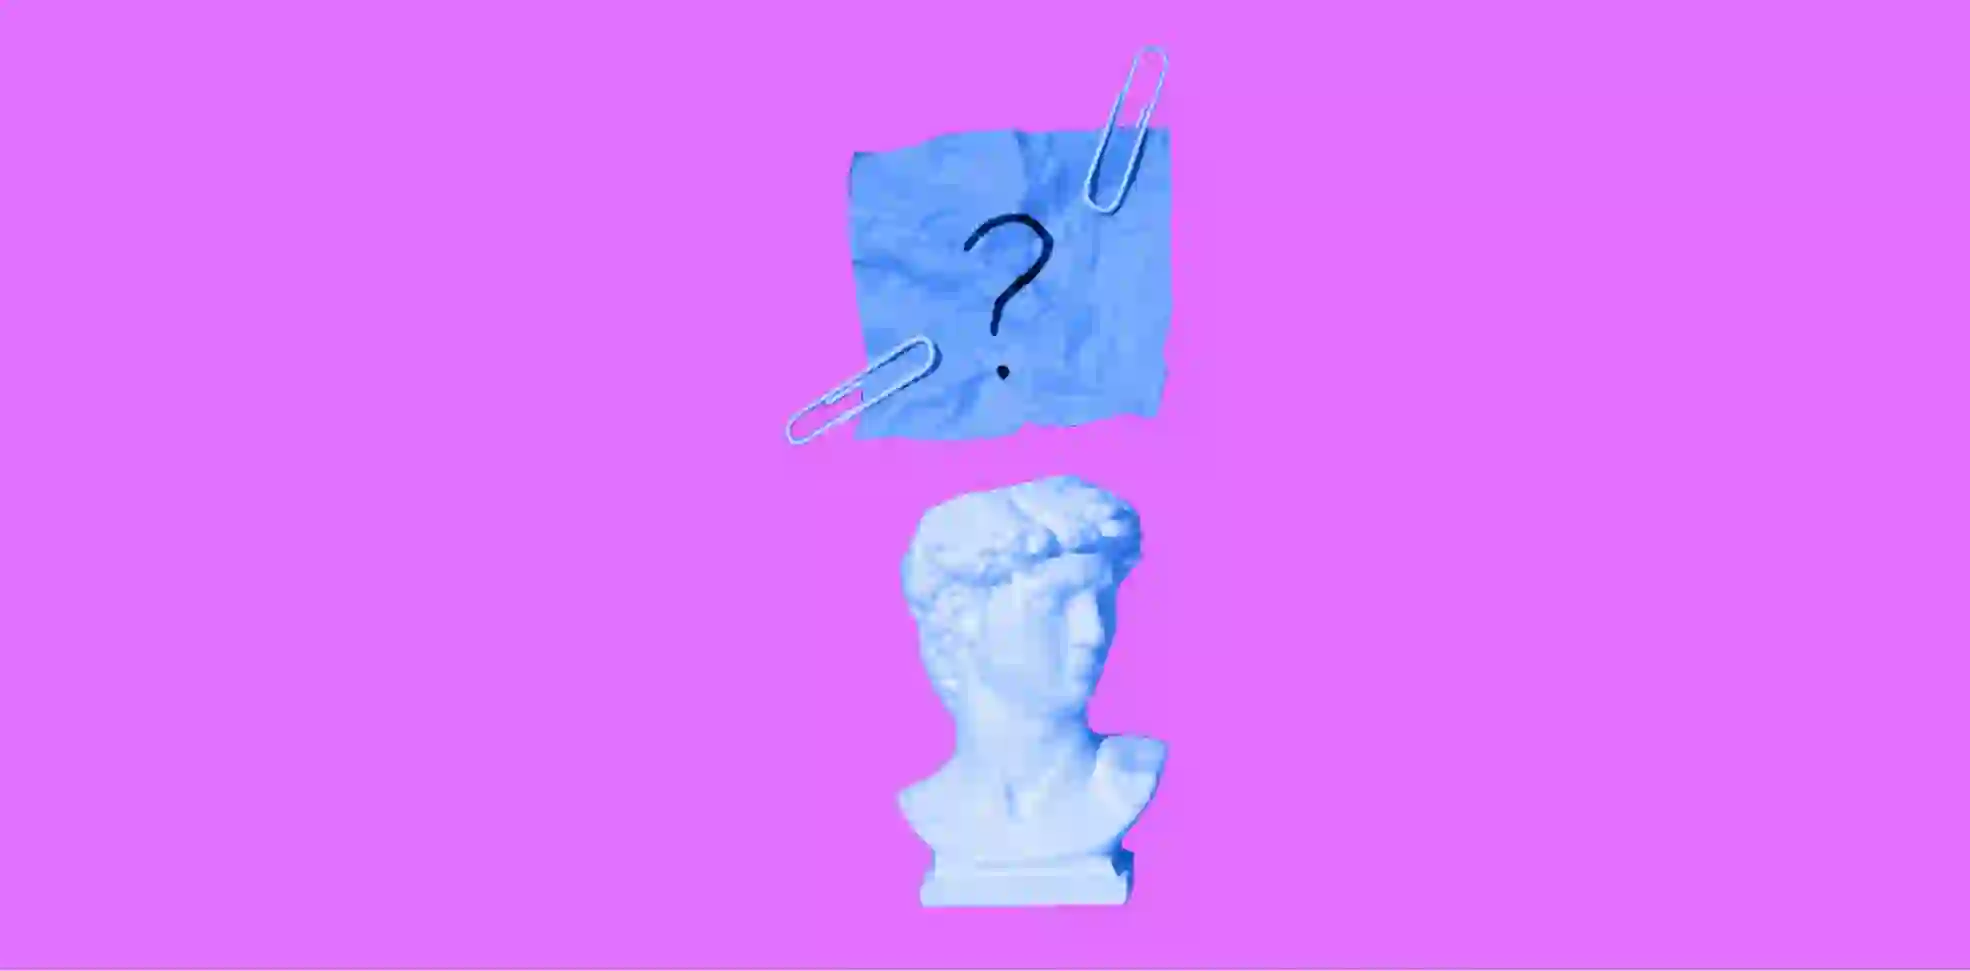 question mark on a piece of paper and a statue on the purple background